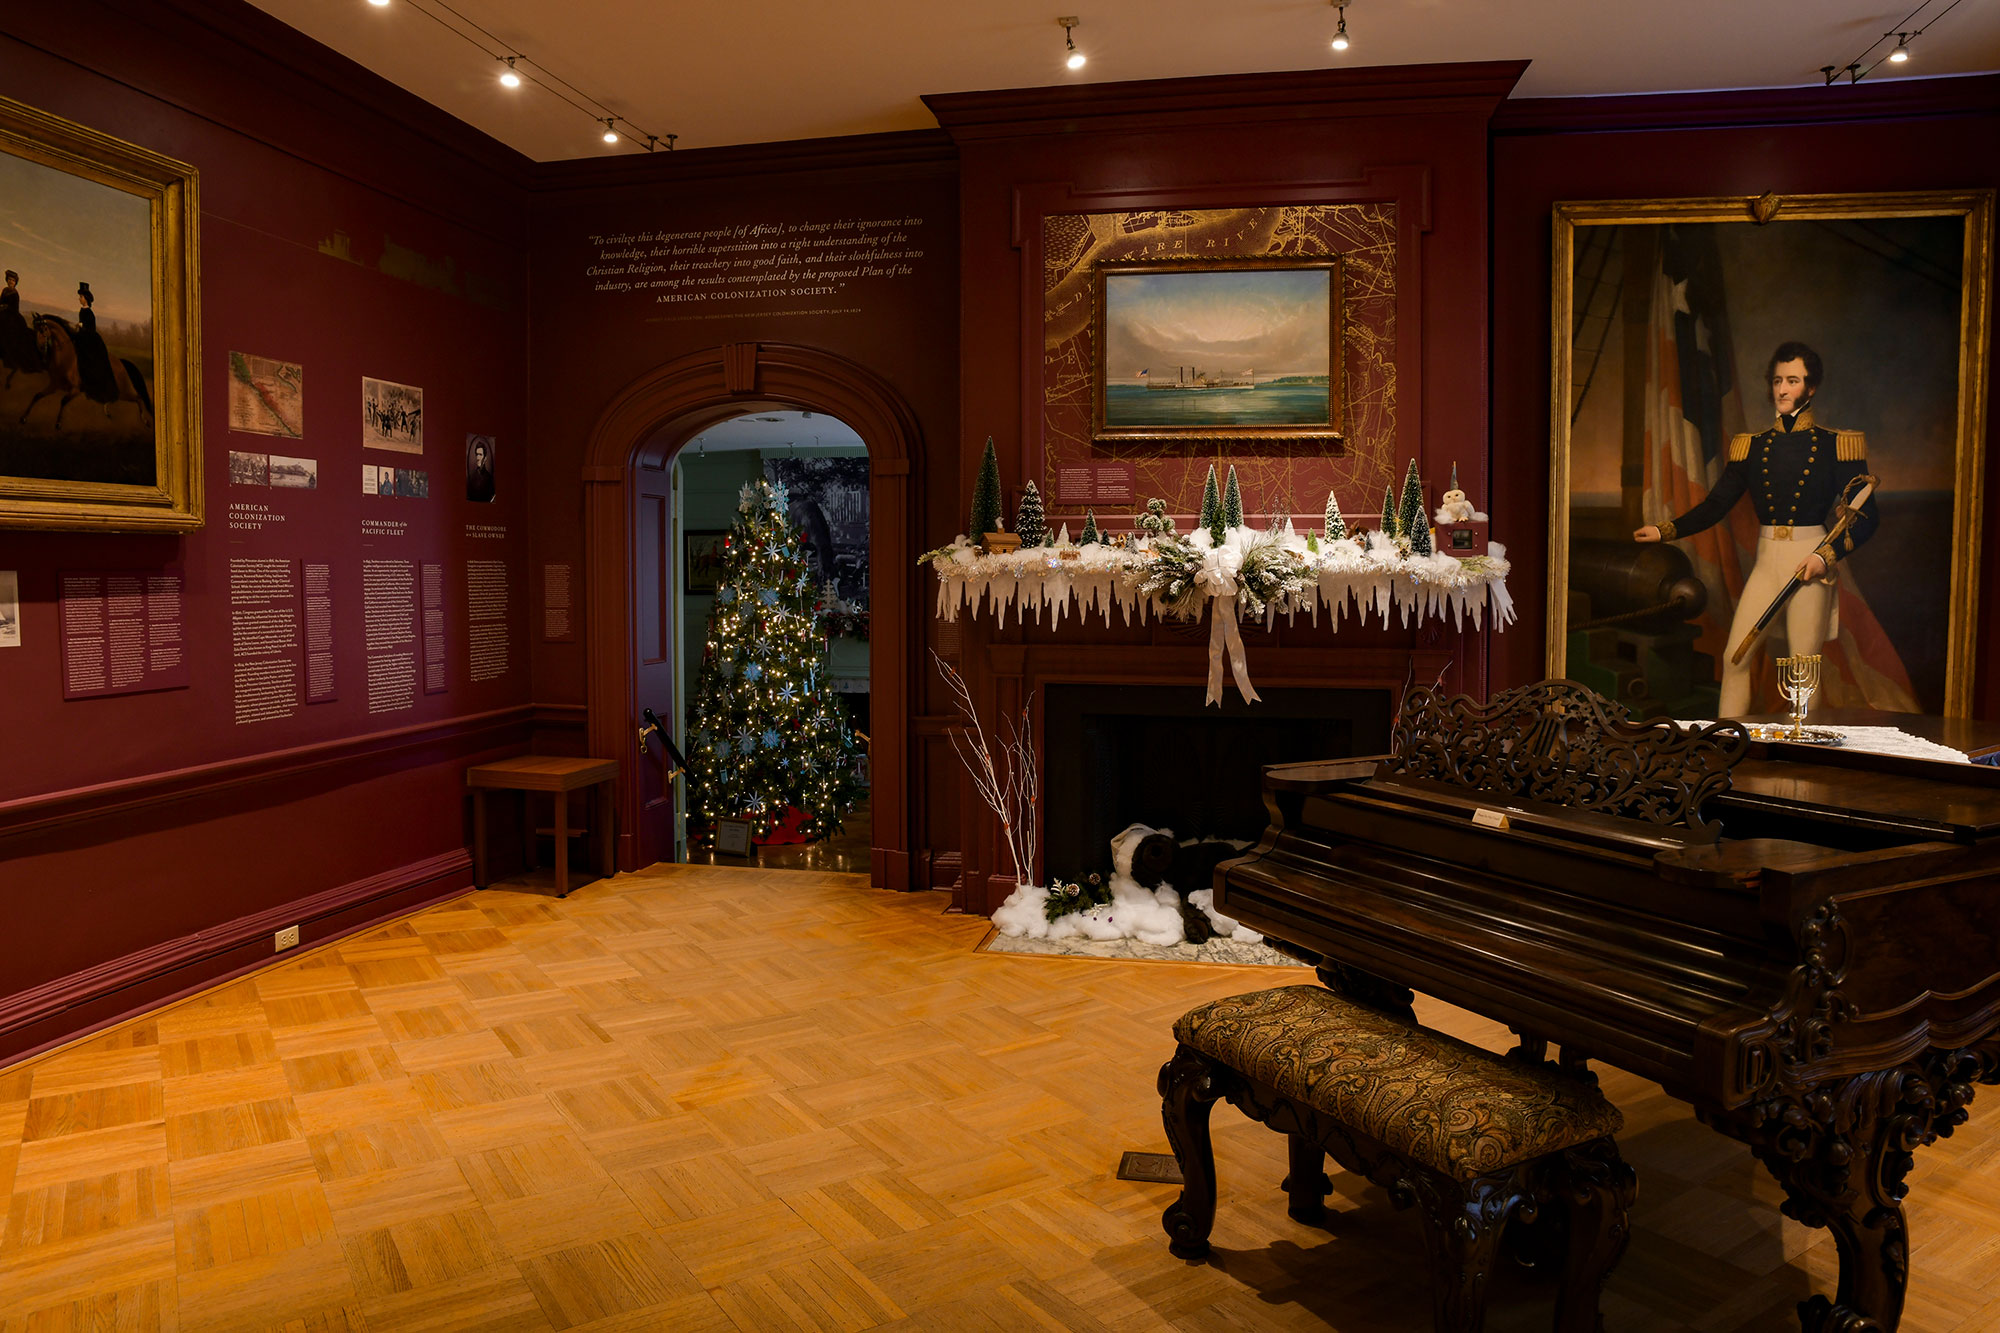 A winter-themed mantelpiece by Neshanic Garden Club is shown in the music room. Plum colored walls, historic paintings and a grand piano are prominent. In the background entry to another room where a Christmas tree is lit.